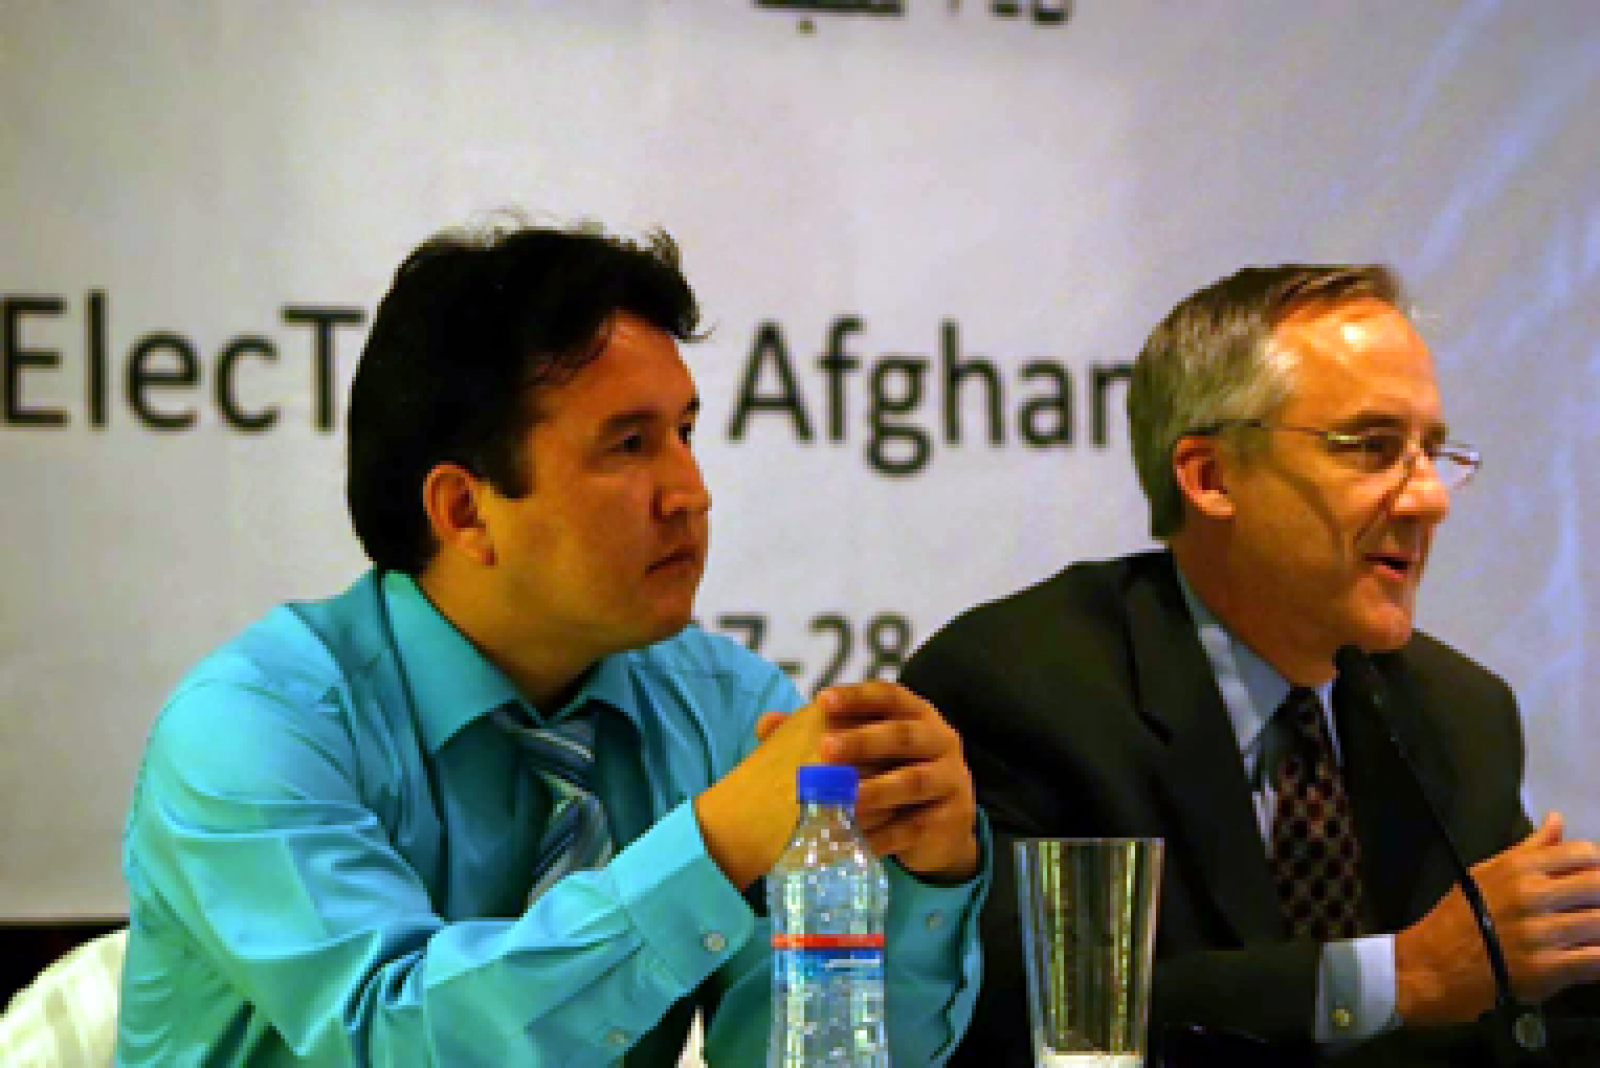 Afghanistan “ElecTech” conference engages government officials on the power of technology in elections